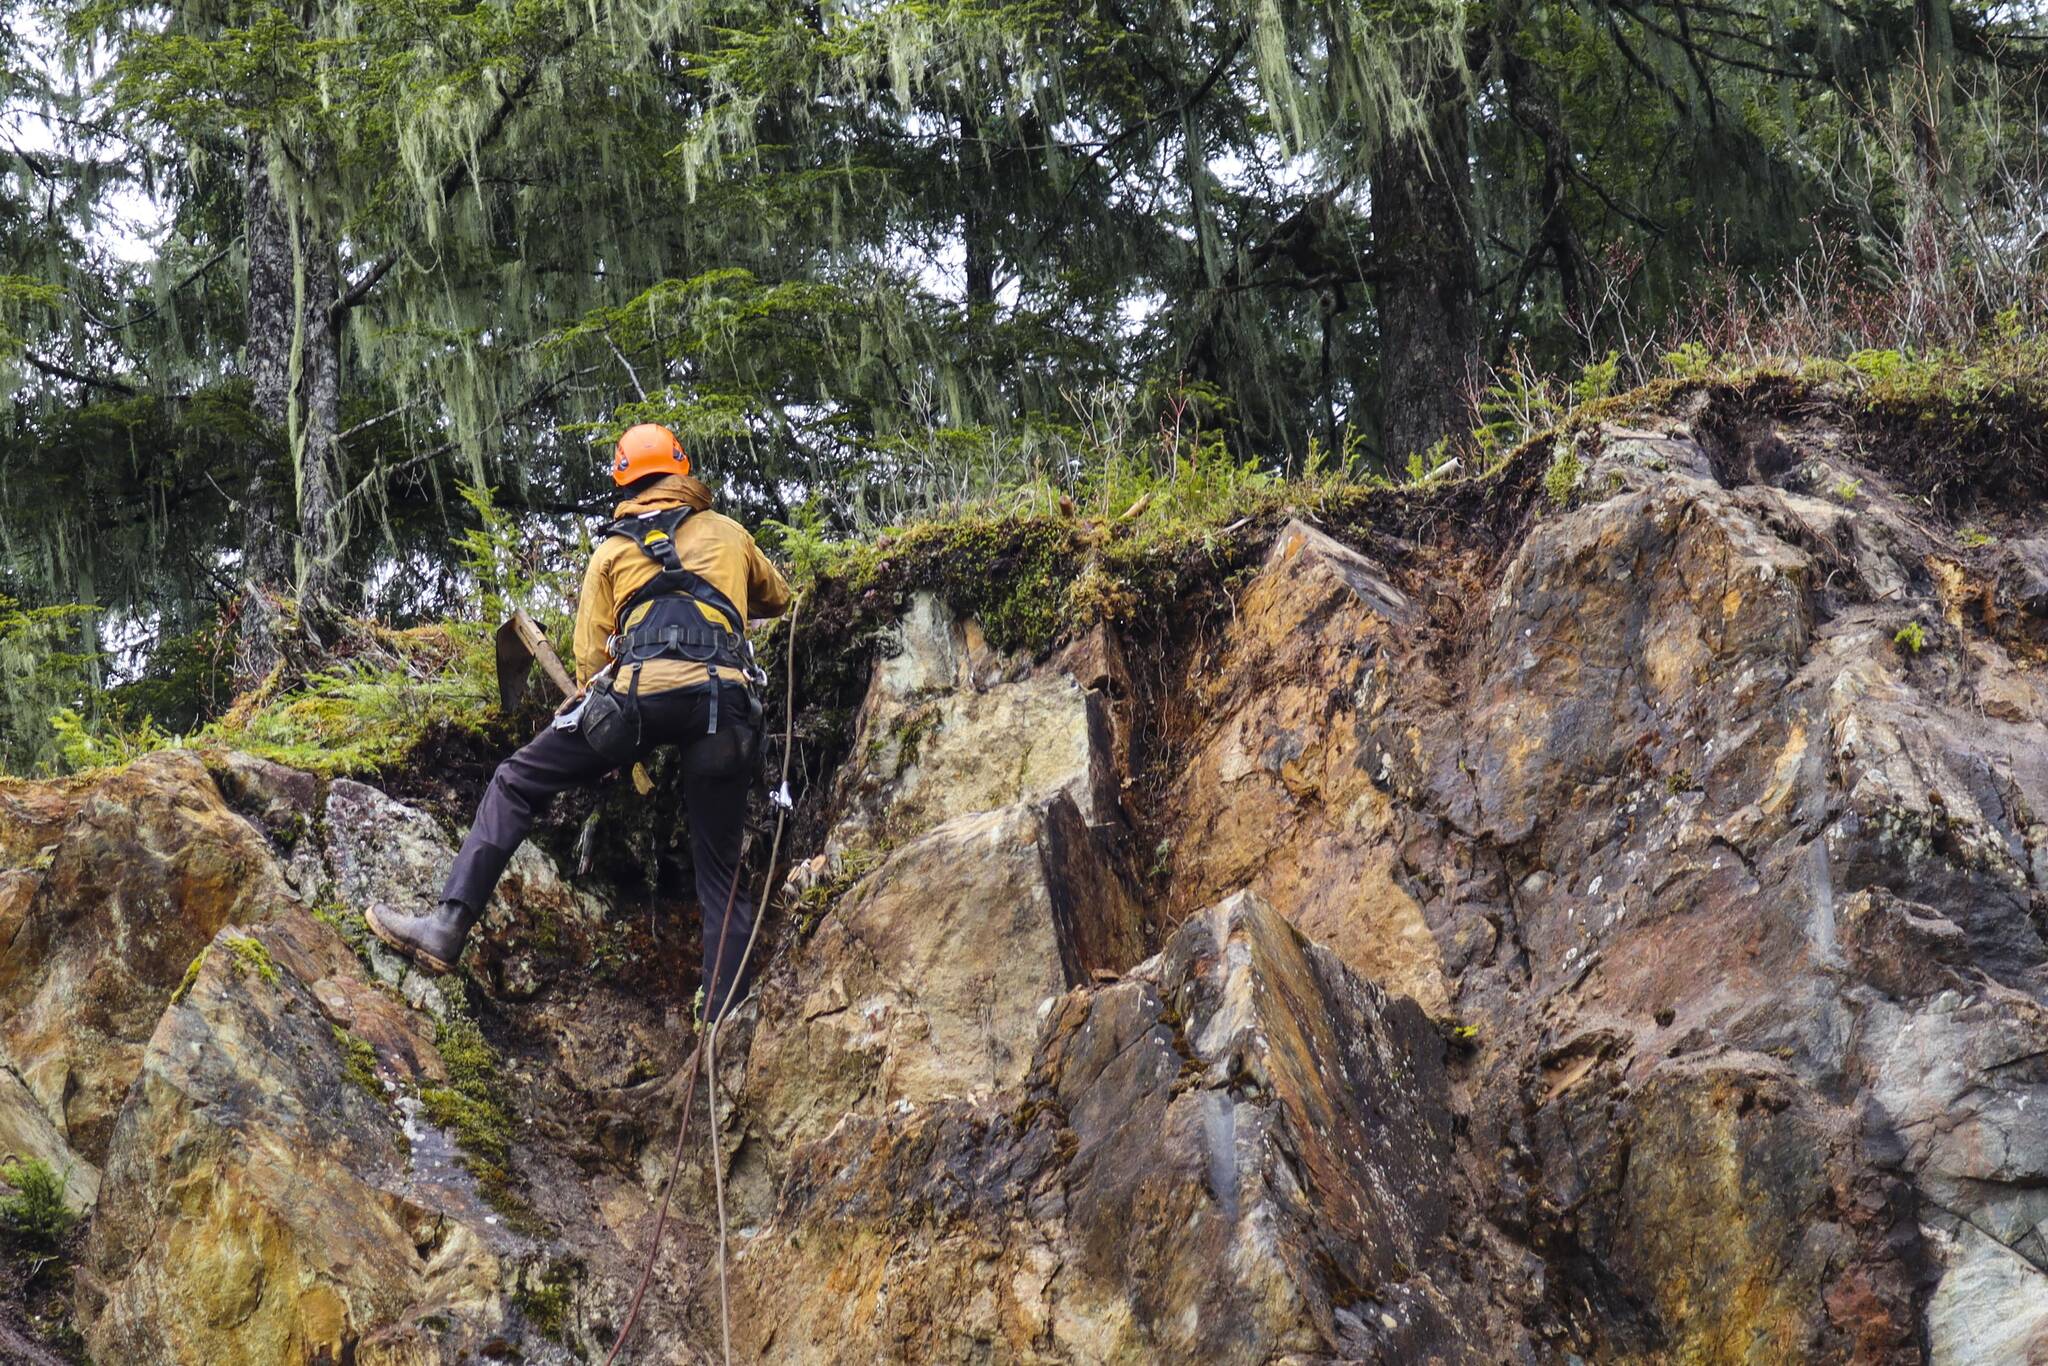 Clint Helander of Advanced Blasting Services clears remaining material from a cliffside near the University of Alaska Southeast student recreation center that had a substantial rockslide in February. (Michael S. Lockett / Juneau Empire)